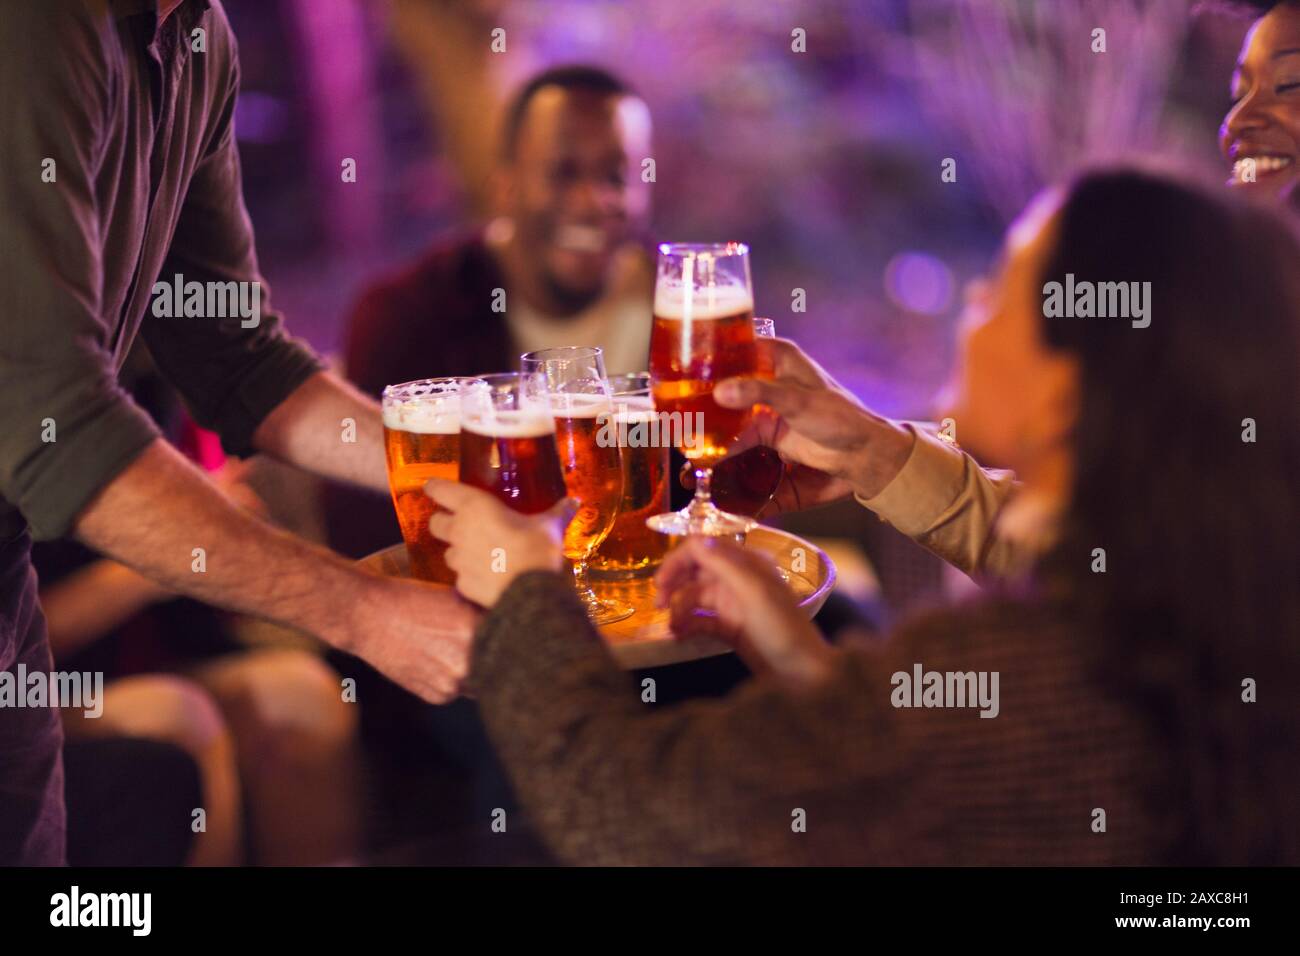 Man serving beer glasses to friends at party Stock Photo